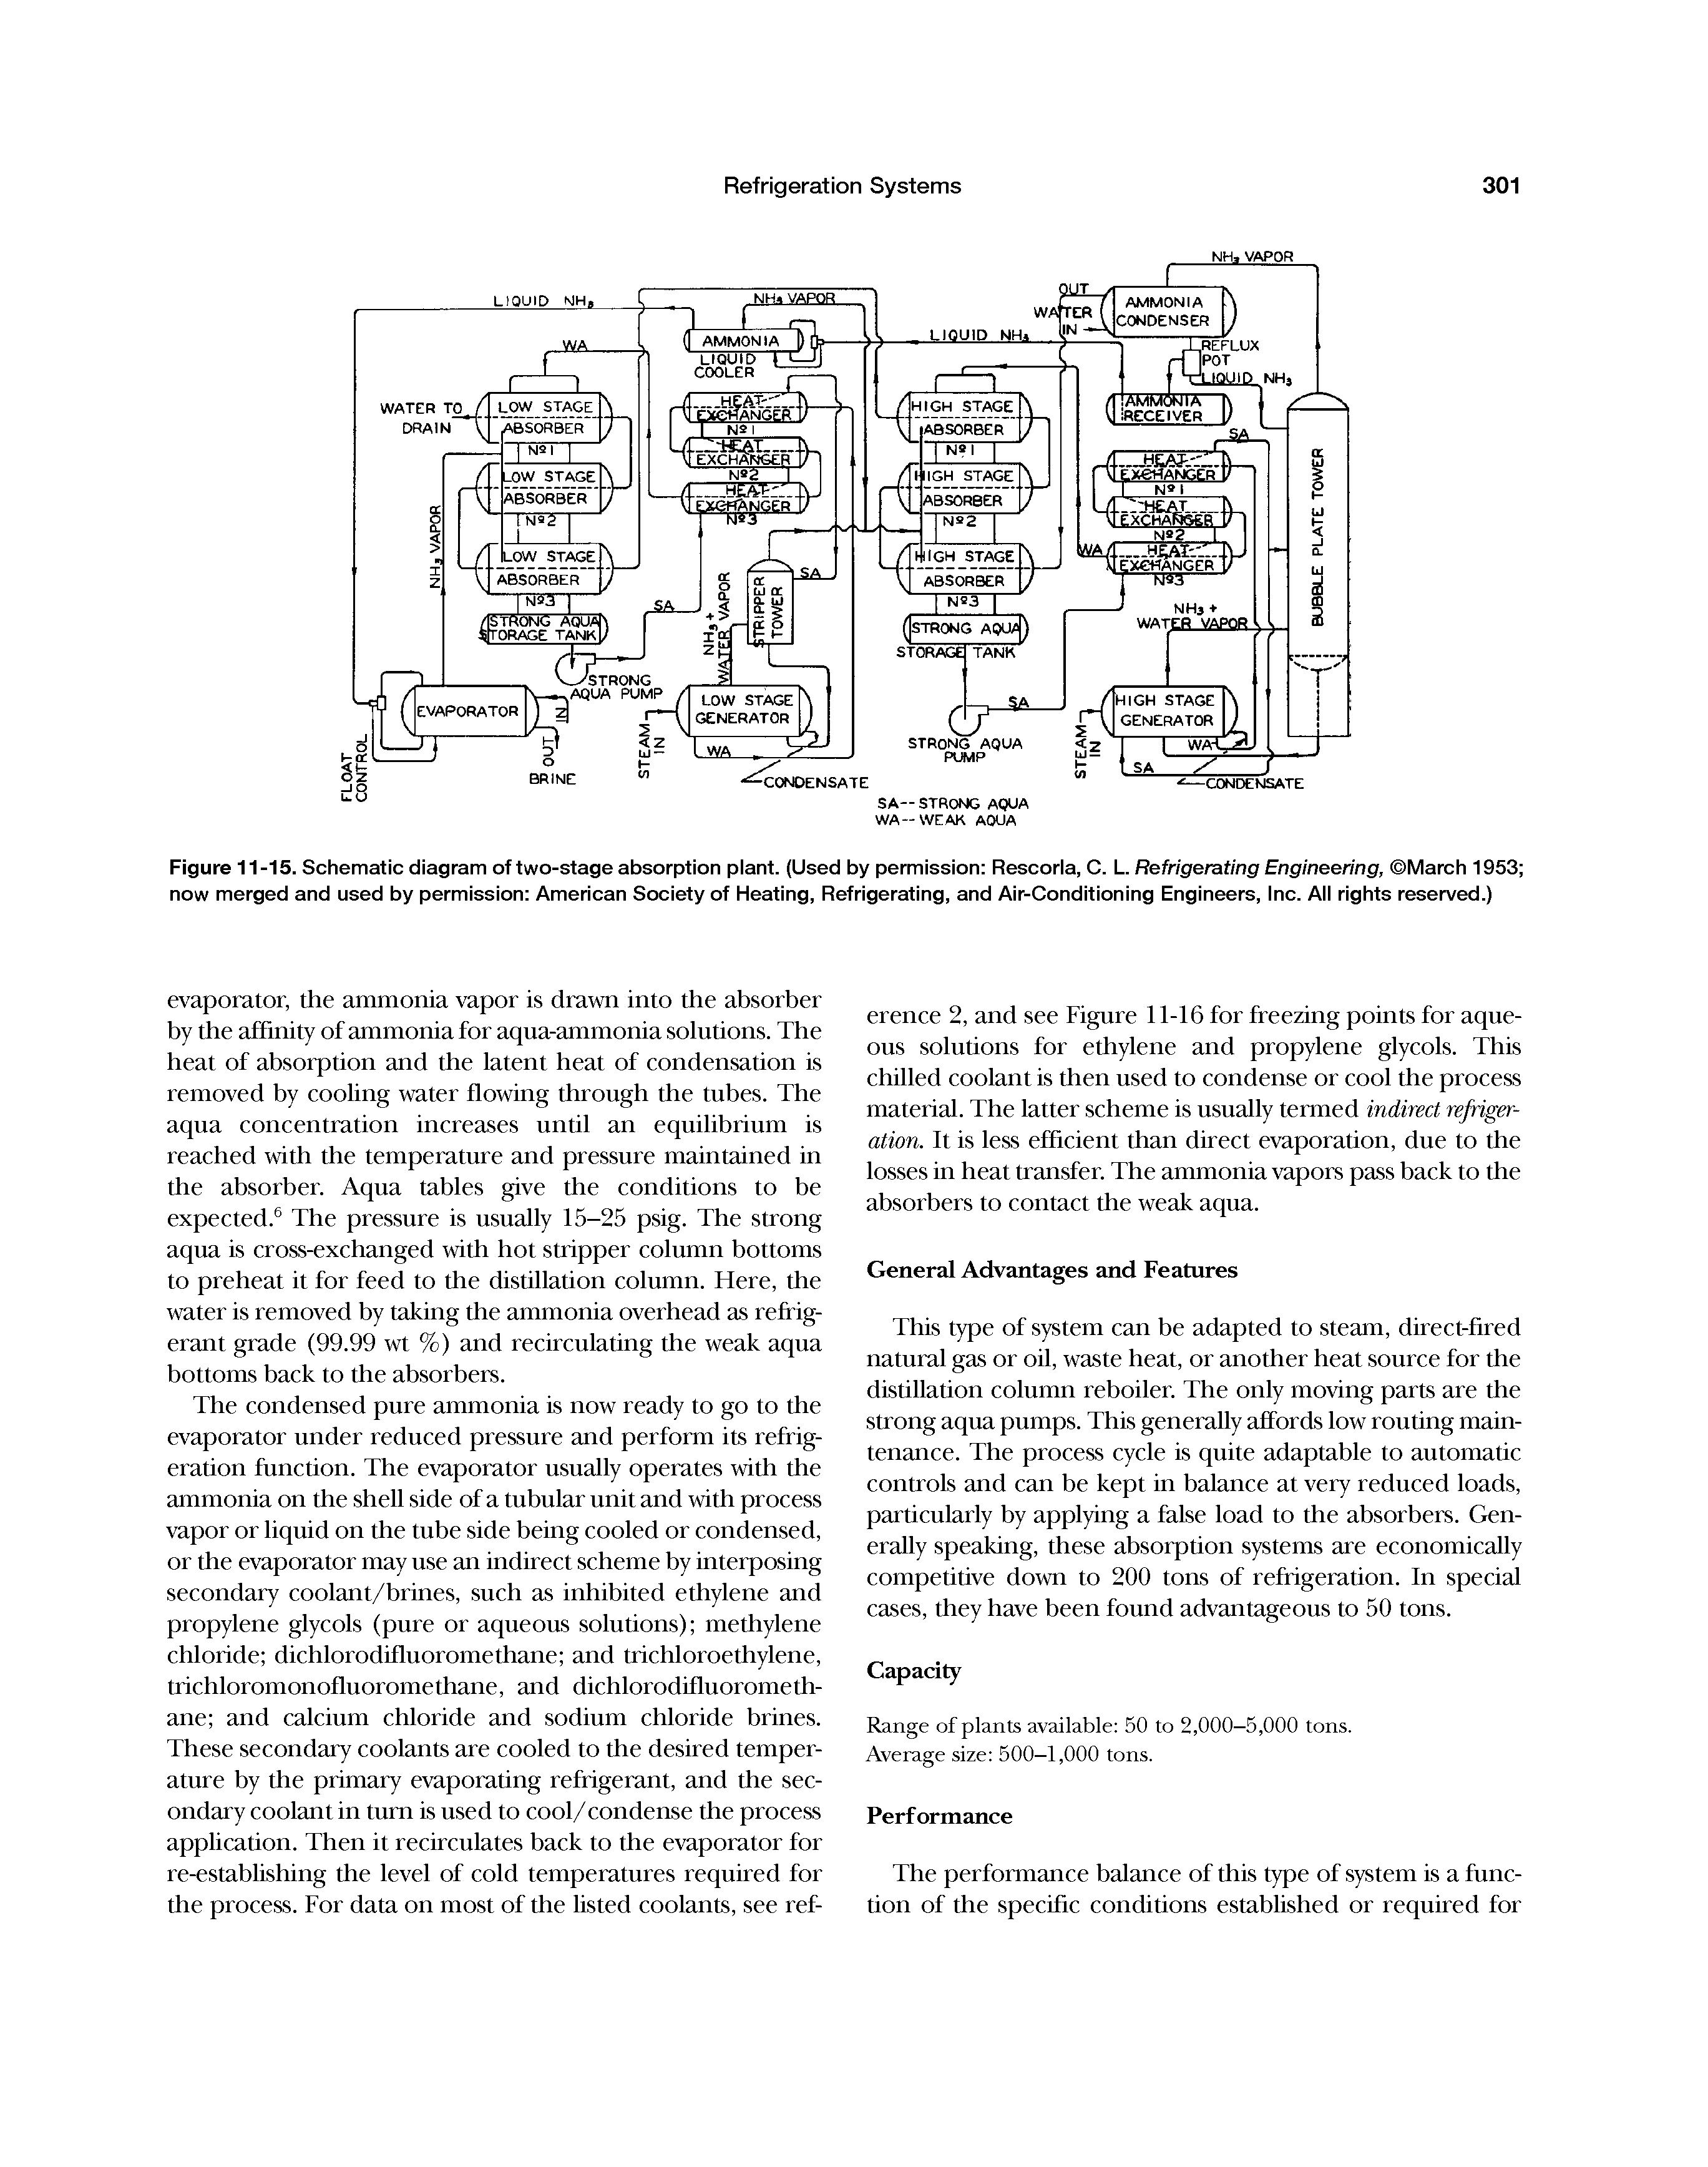 Figure 11-15. Schematic diagram of two-stage absorption plant. (Used by permission Rescorla, C. L. Refrigerating Engineering, March 1953 now merged and used by permission American Society of Heating, Refrigerating, and Air-Conditioning Engineers, Inc. All rights reserved.)...